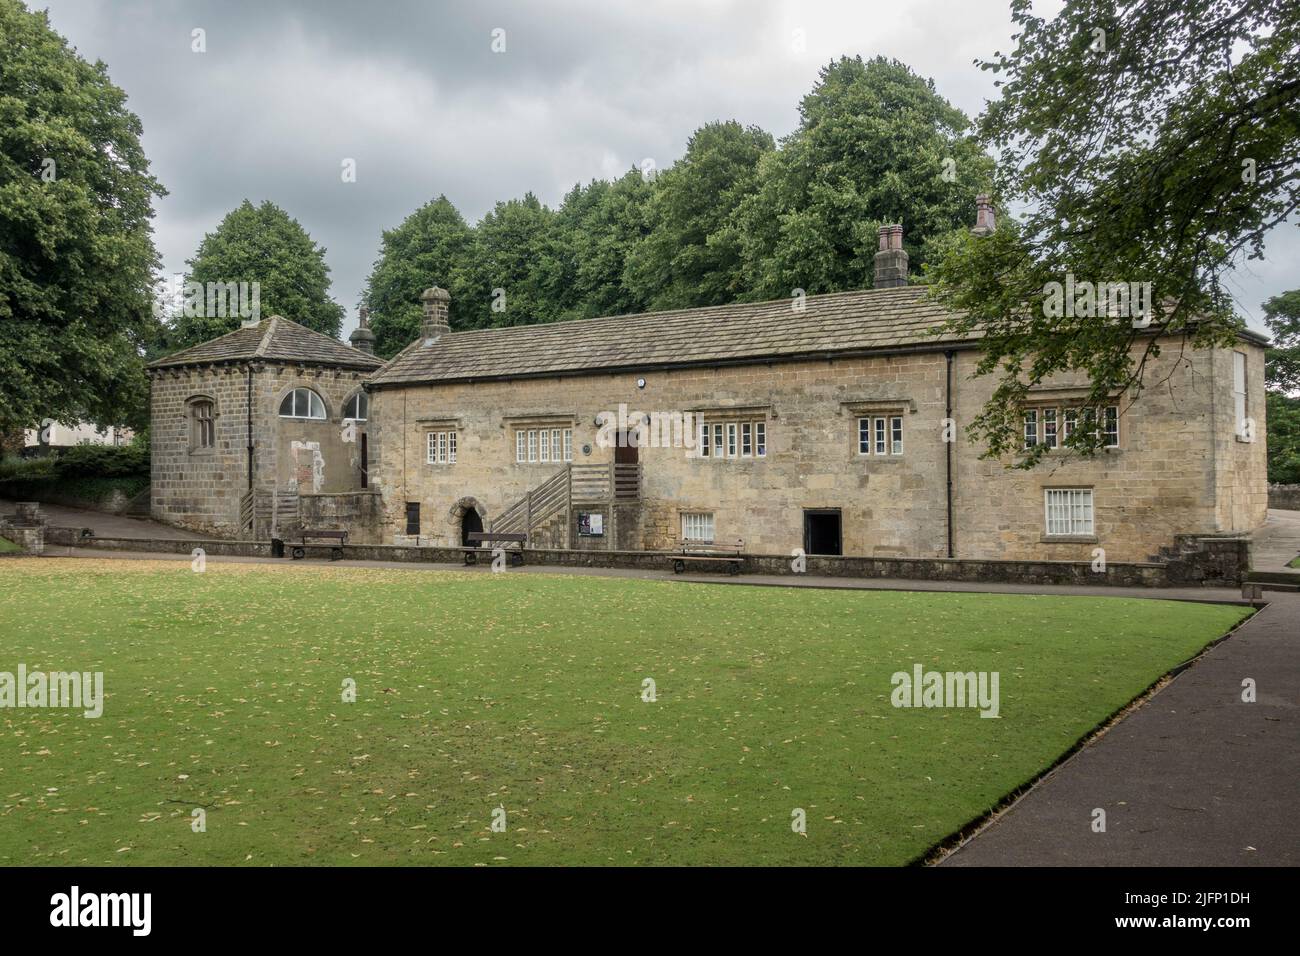 Courthouse in the grounds of Knaresborough Castle, a ruined fortress overlooking the River Nidd in the town of Knaresborough, North Yorkshire, UK. Stock Photo